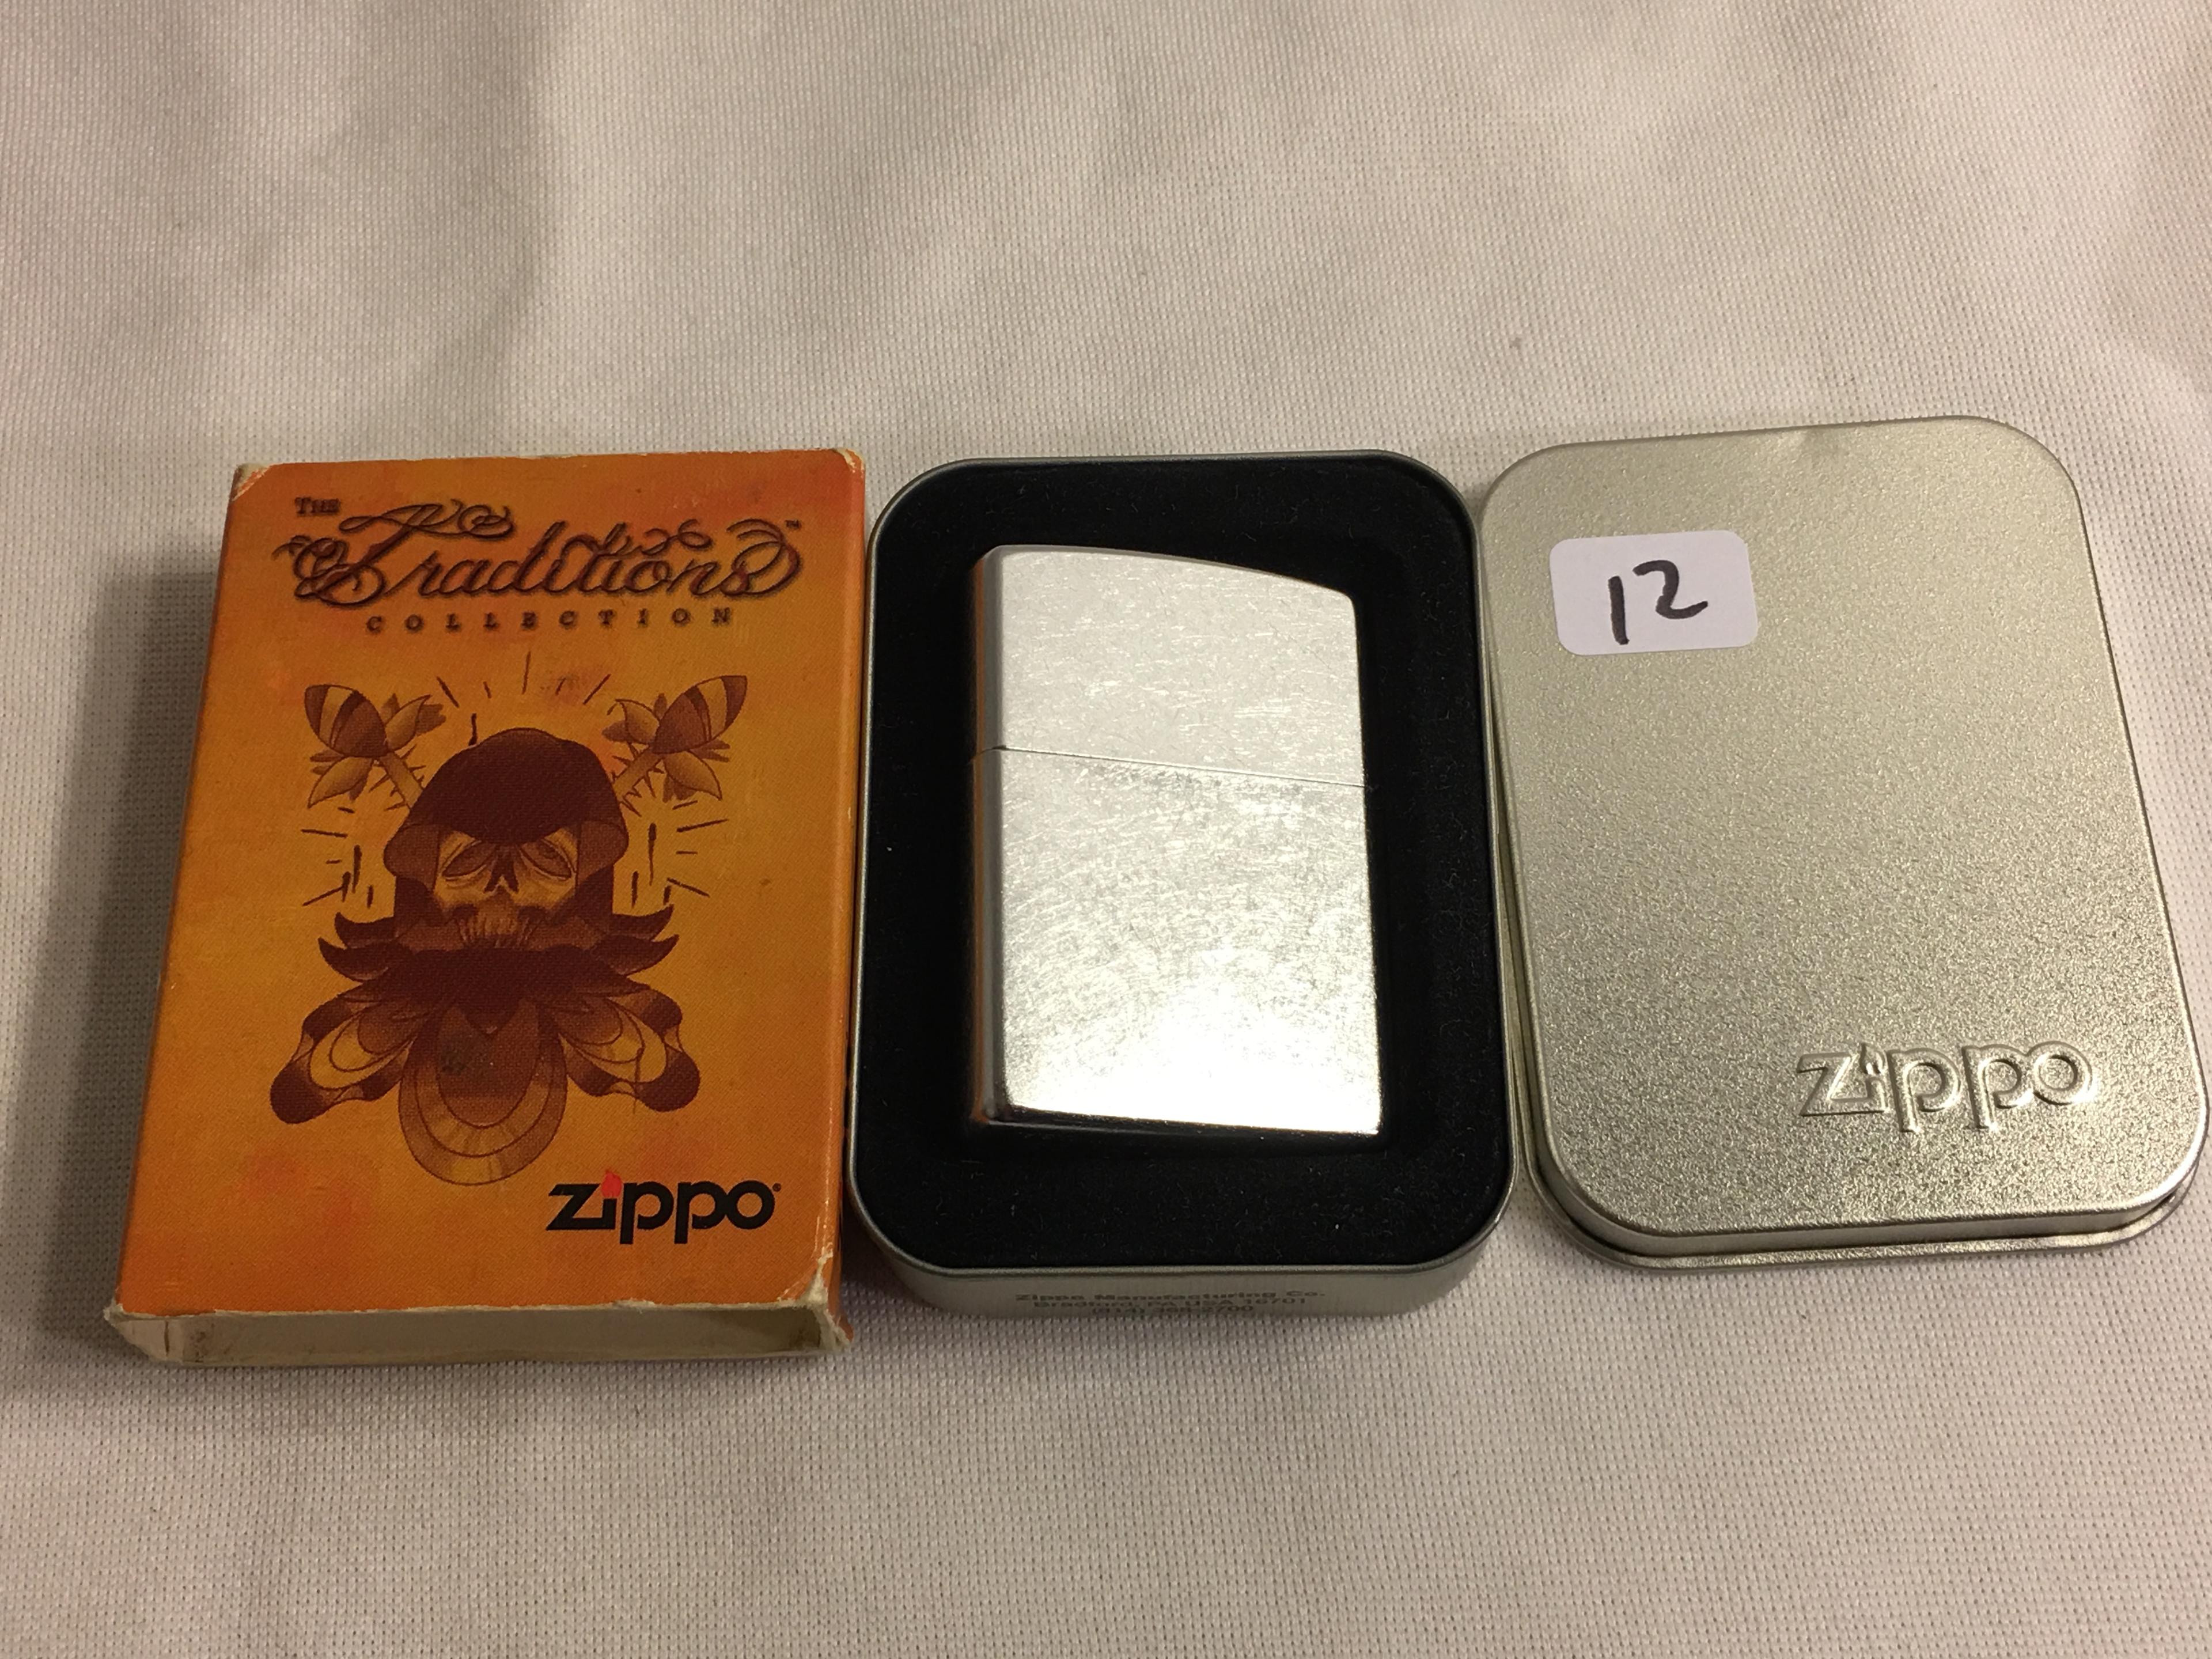 Collector L Zippo 05  Bradford Made in USA Stainless Steel Pocket Lighter Size:2.1/4"tall